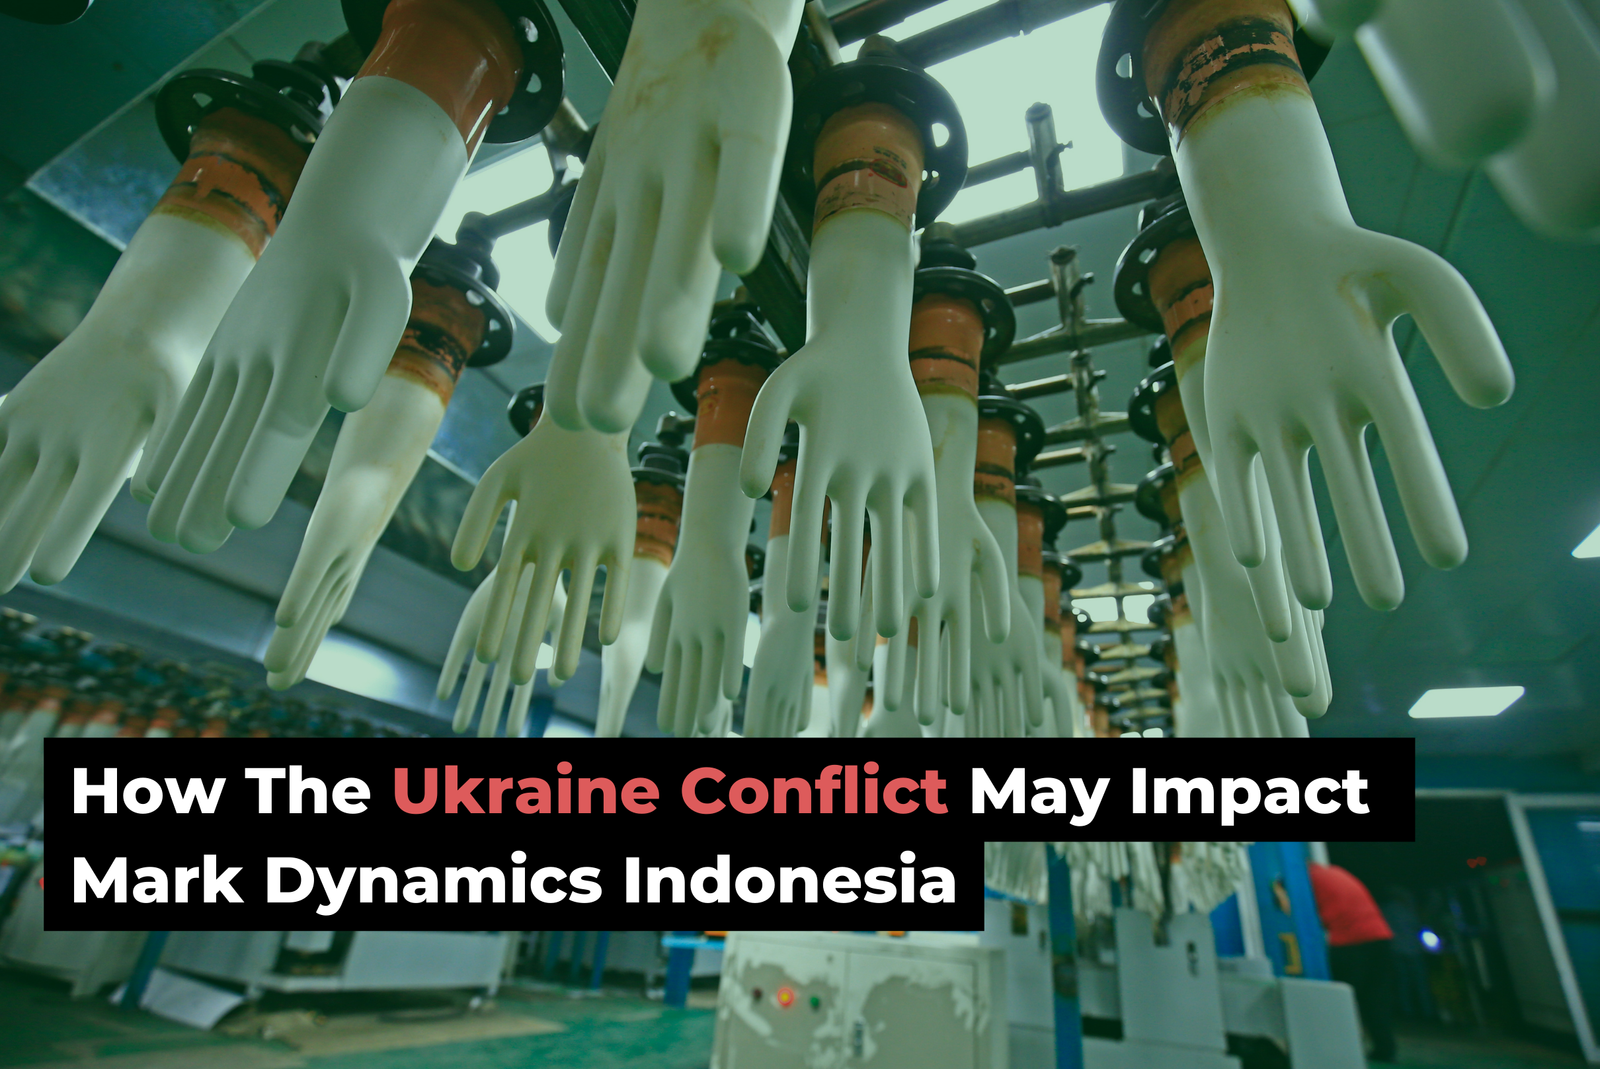 How The Ukraine Conflict May Impact Mark Dynamics Indonesia